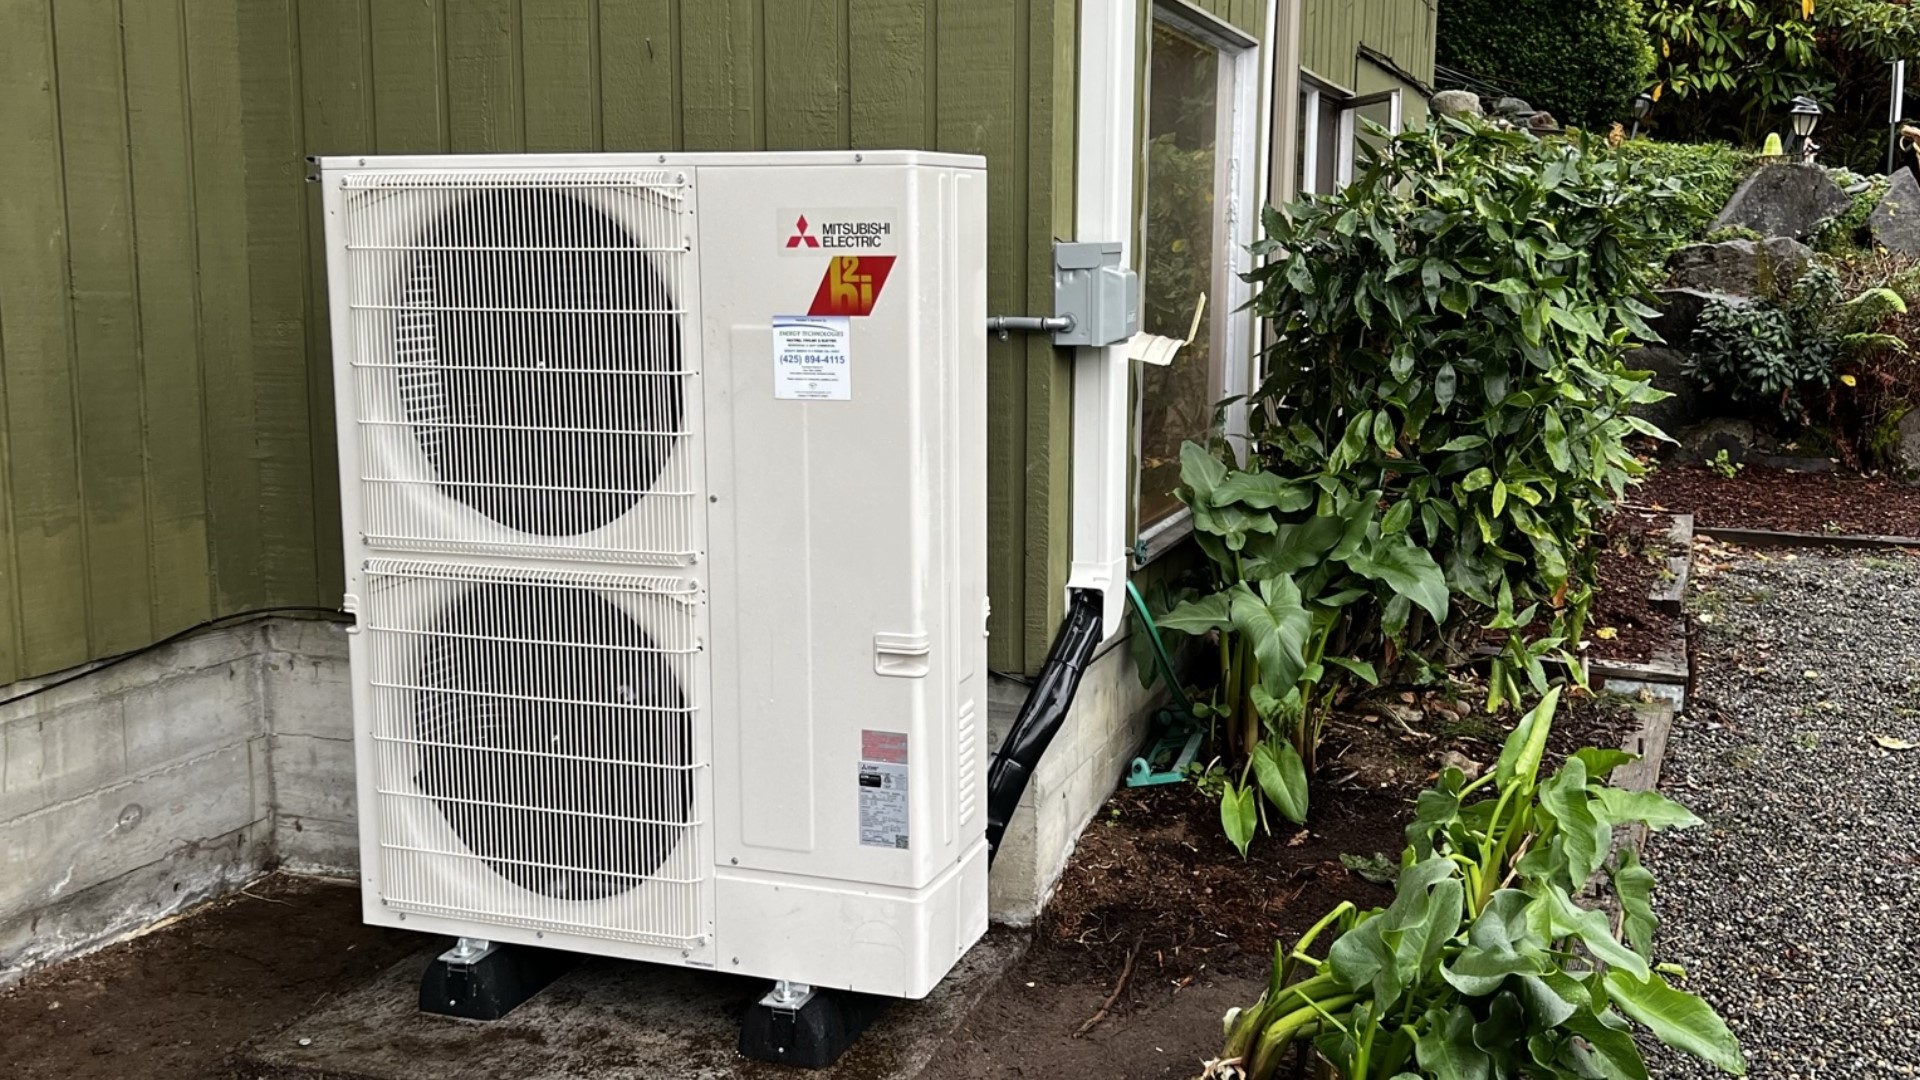 Current rebates may make it more affordable to equip your home with a ducted or ductless heat pump. Sponsored Energy Technologies.